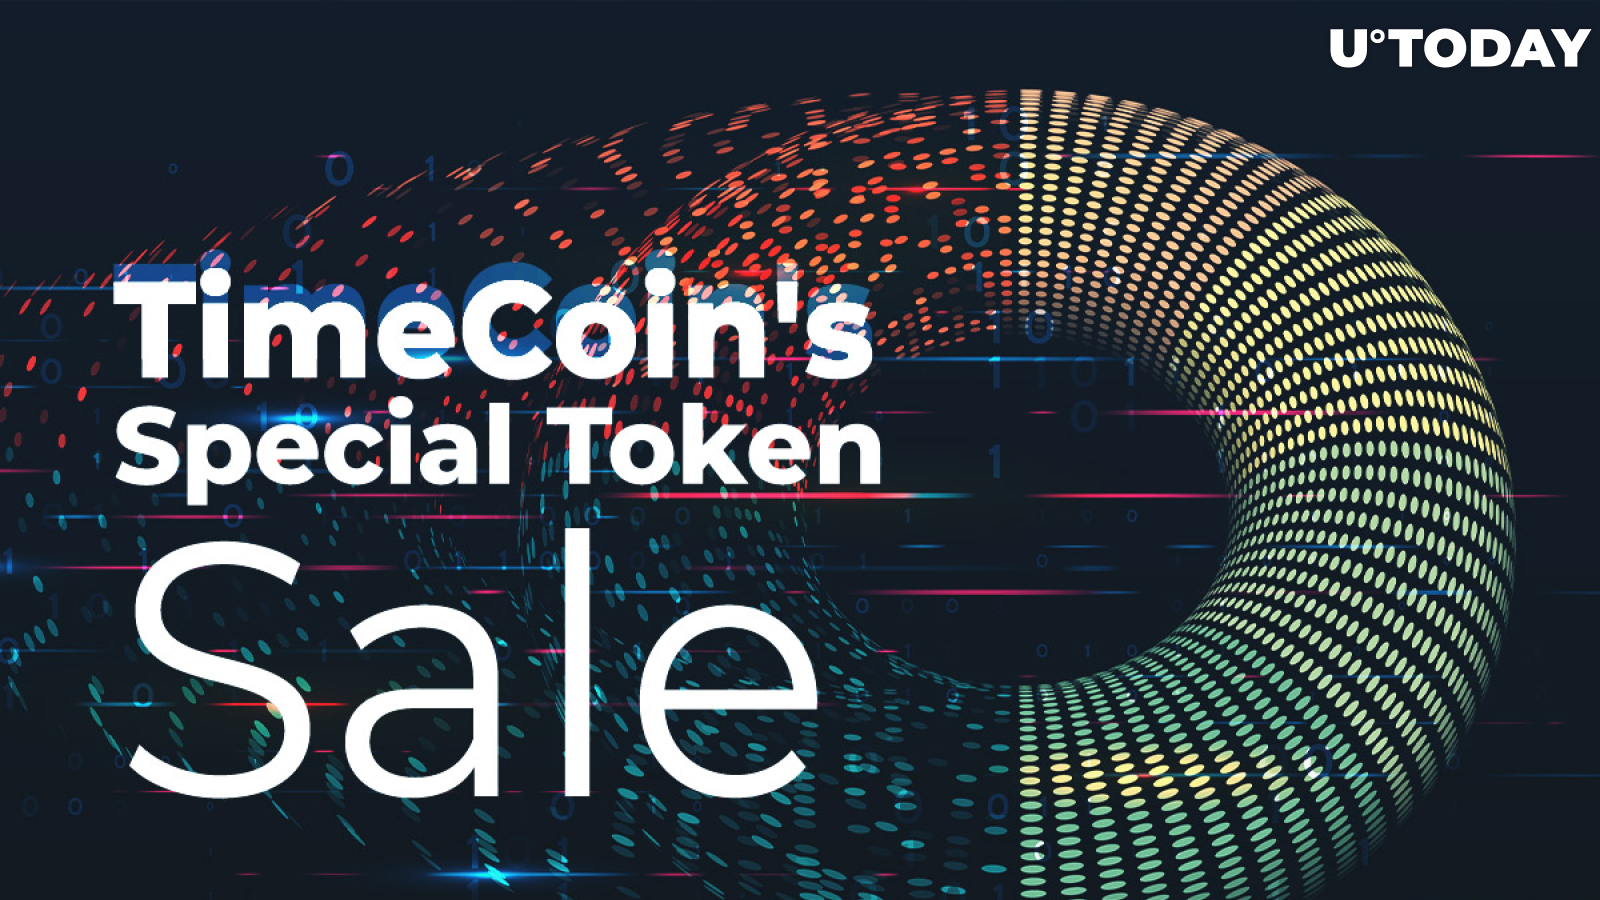 TimeCoin's Special Token Sale